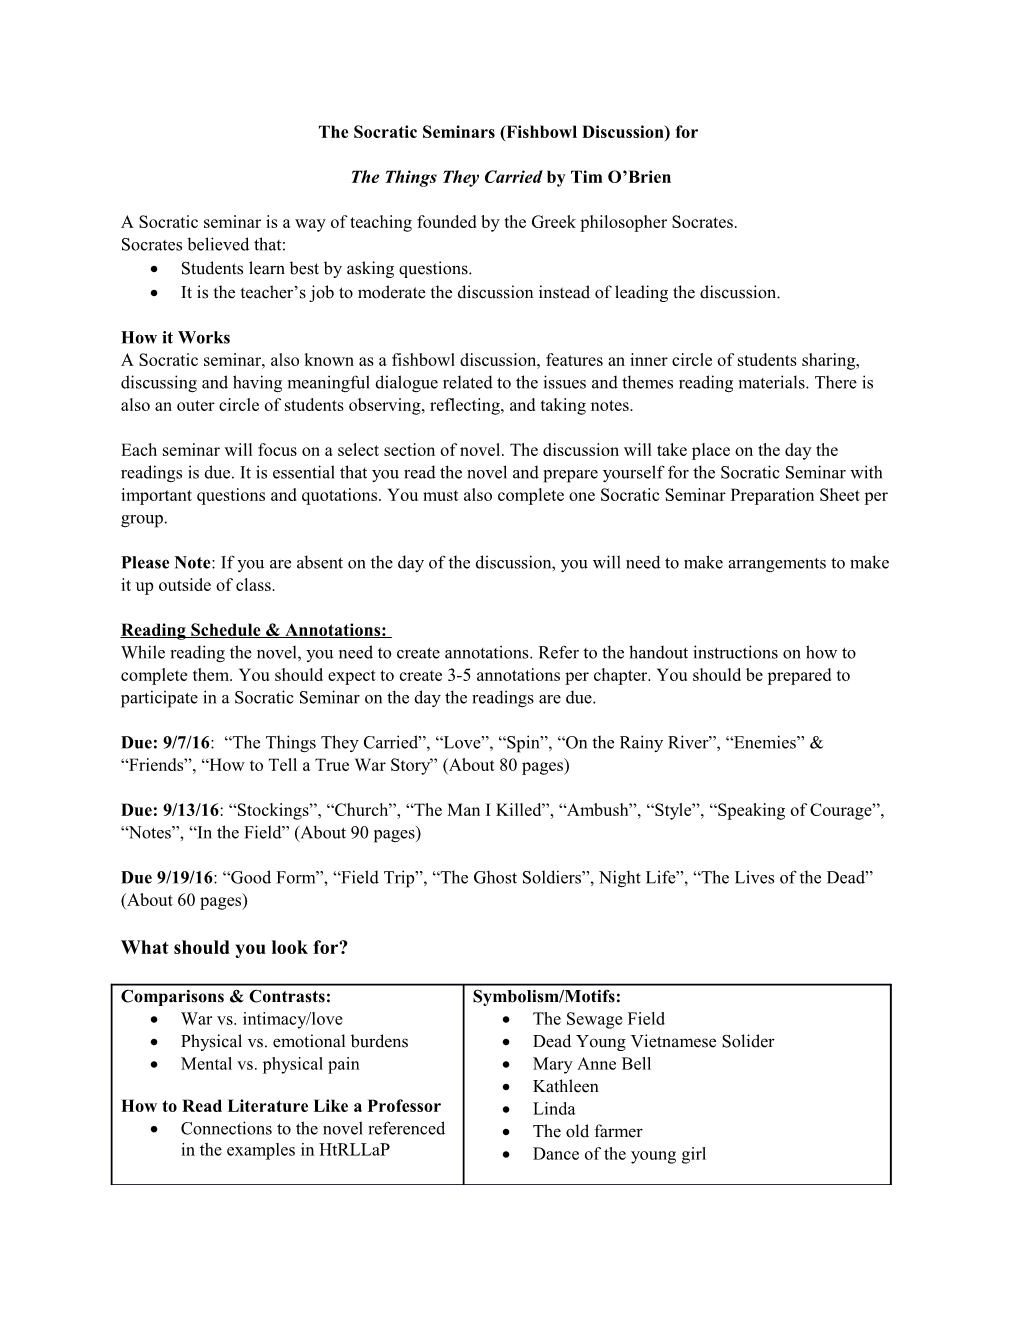 The Socratic Seminars (Fishbowl Discussion) For